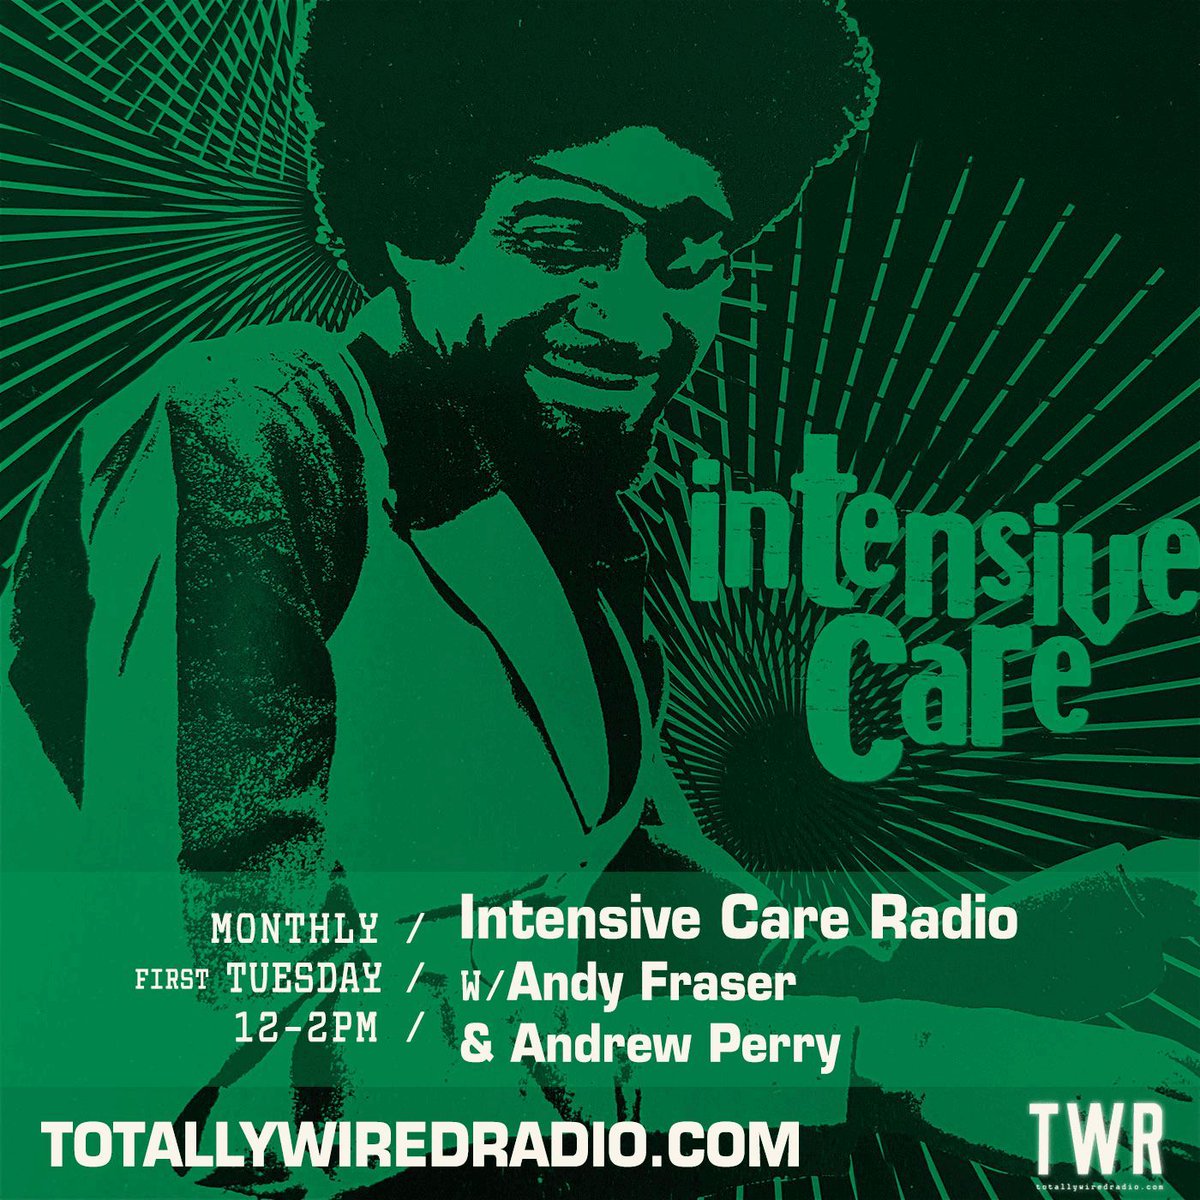 Intensive Care Radio #live w/ Andy Fraser & Andrew Perry #startingsoon on #TotallyWiredRadio Listen @ Link in bio. 
-
#MusicIsLife #London
-
#Punk #Reggae #African #Soul #Techno #Interviews